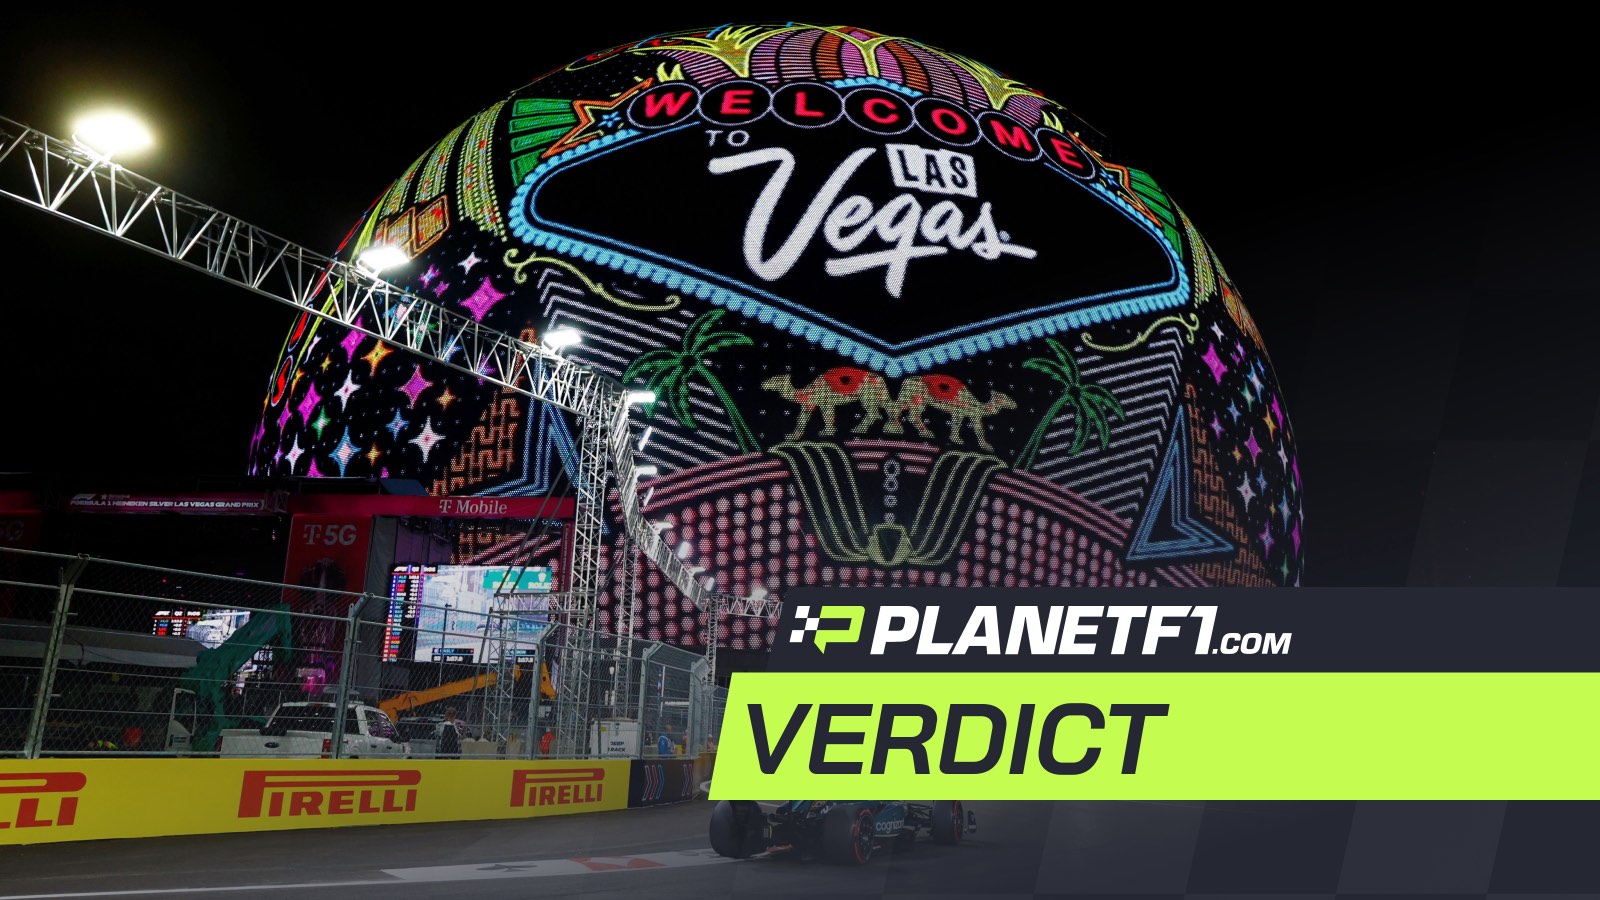 Las Vegas Grand Prix offer of a $200 discount doesn't go far